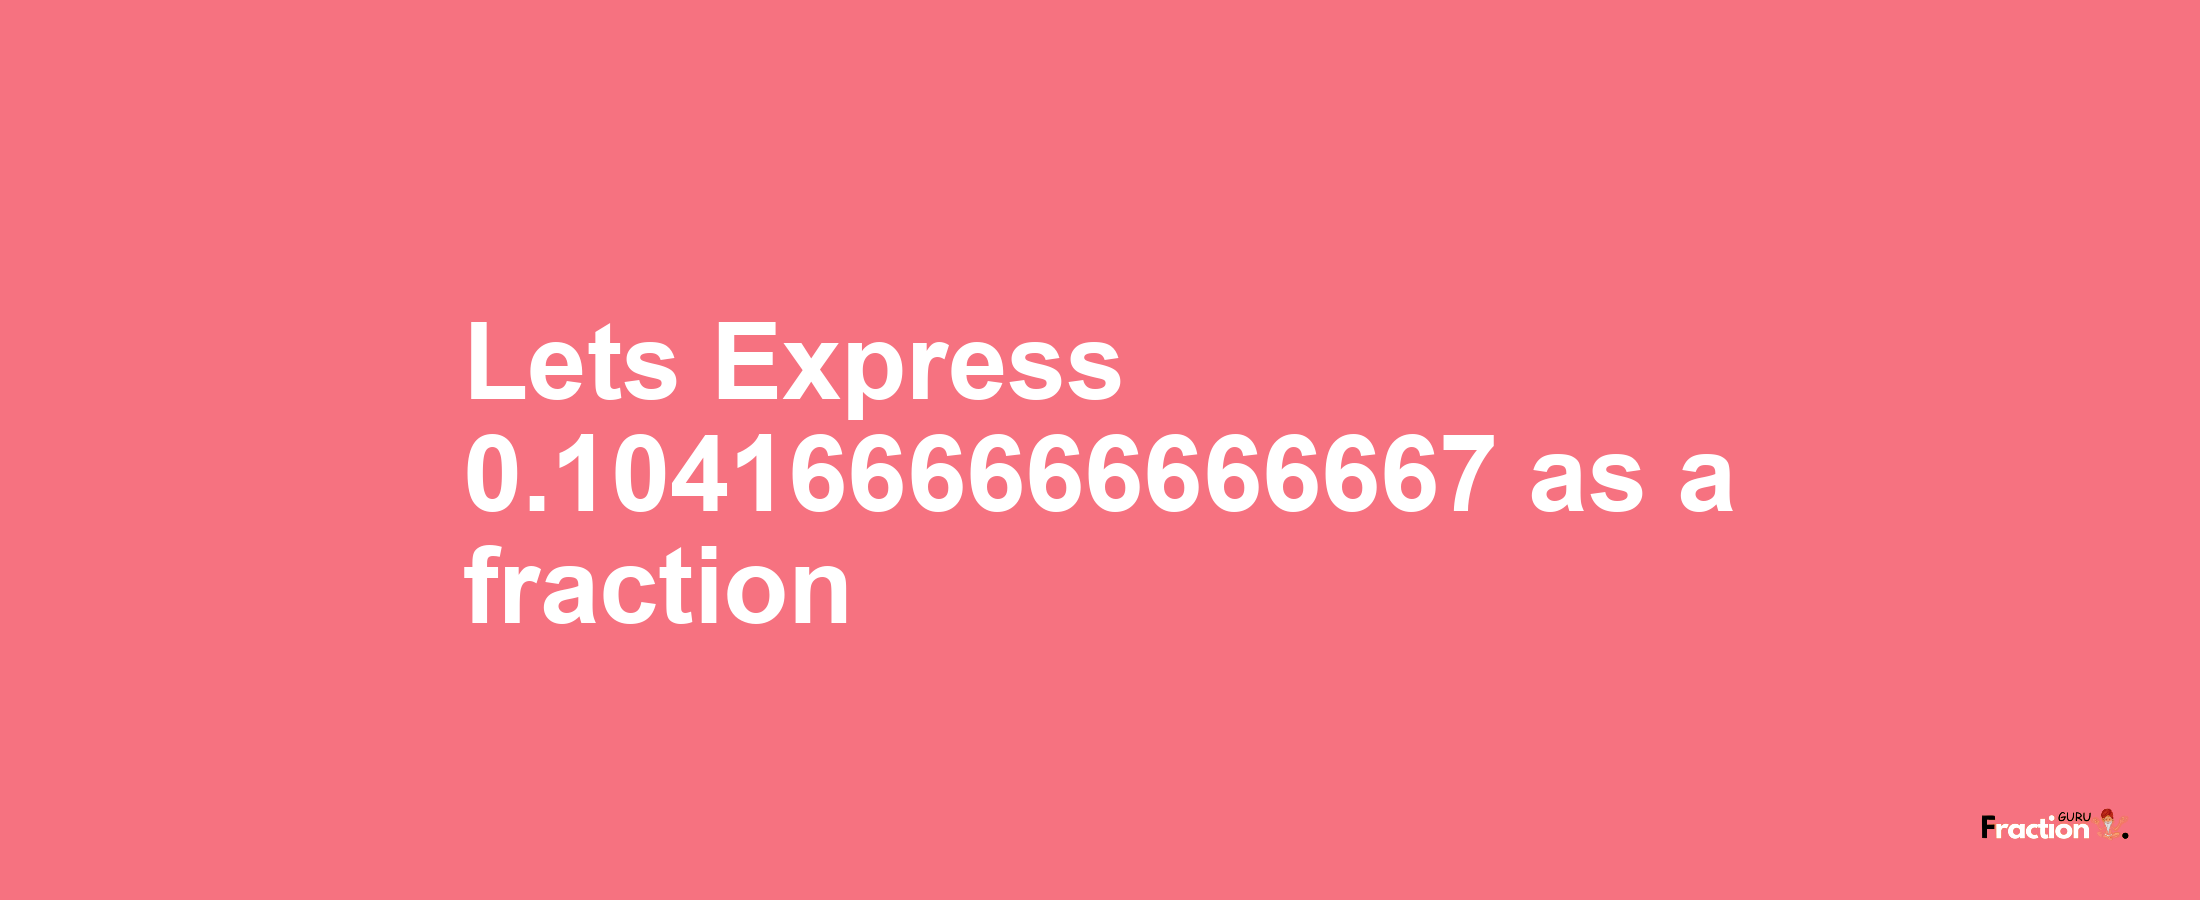 Lets Express 0.1041666666666667 as afraction